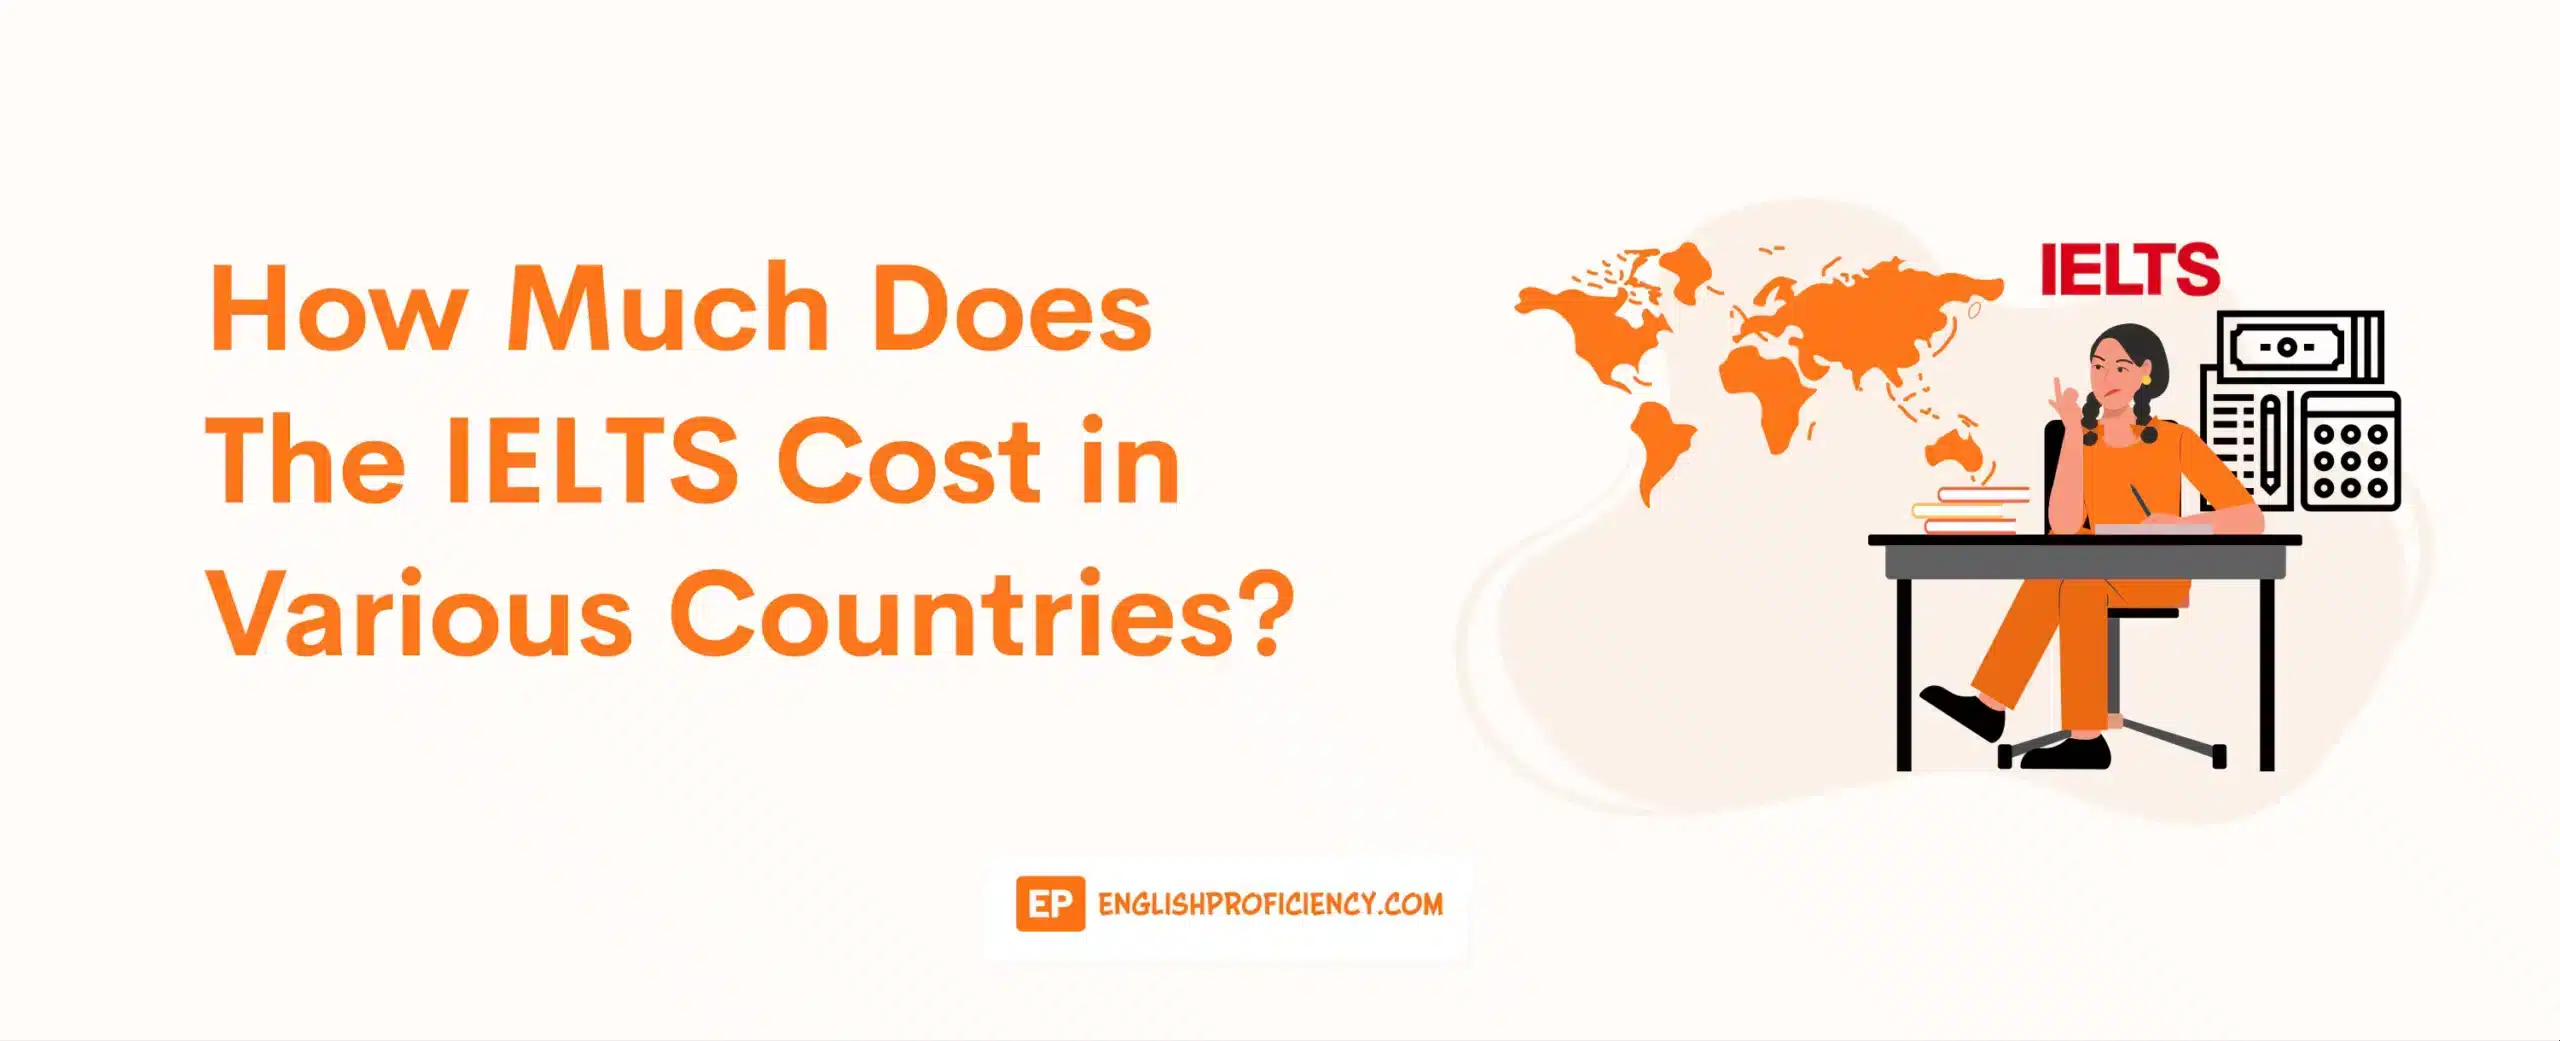 How Much Does The IELTS Cost in Various Countries